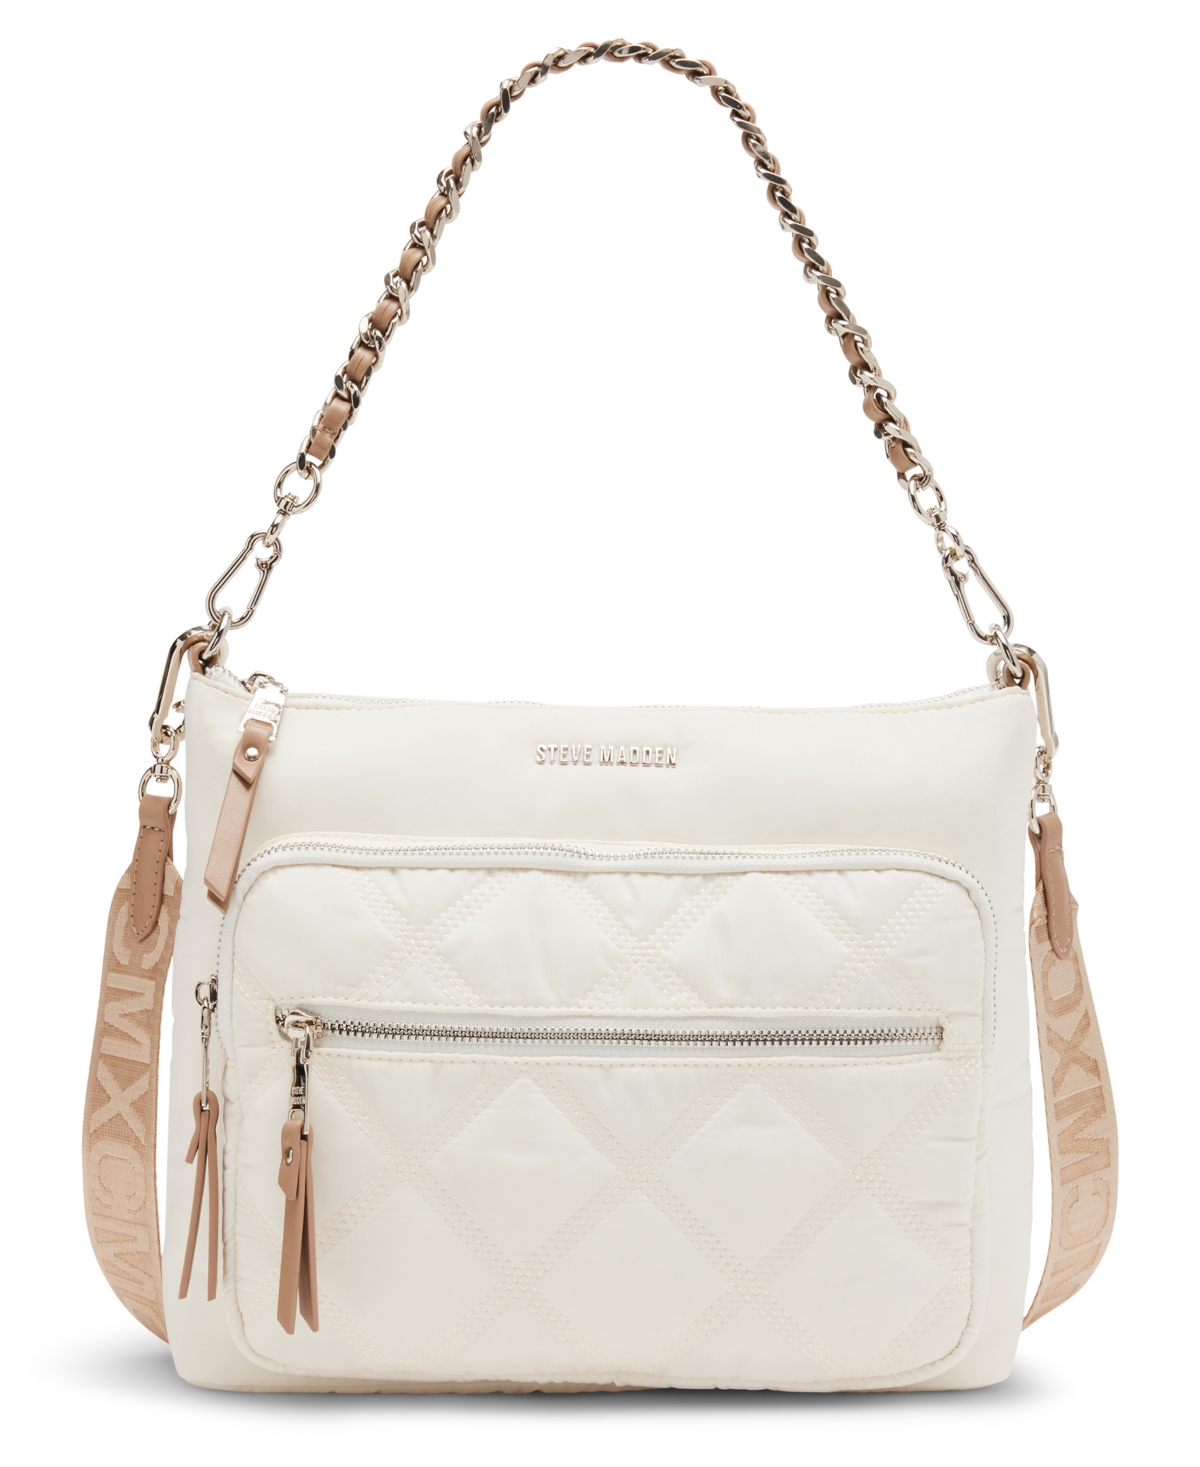 Forrest Nylon Quilted North South Crossbody - White, Tan